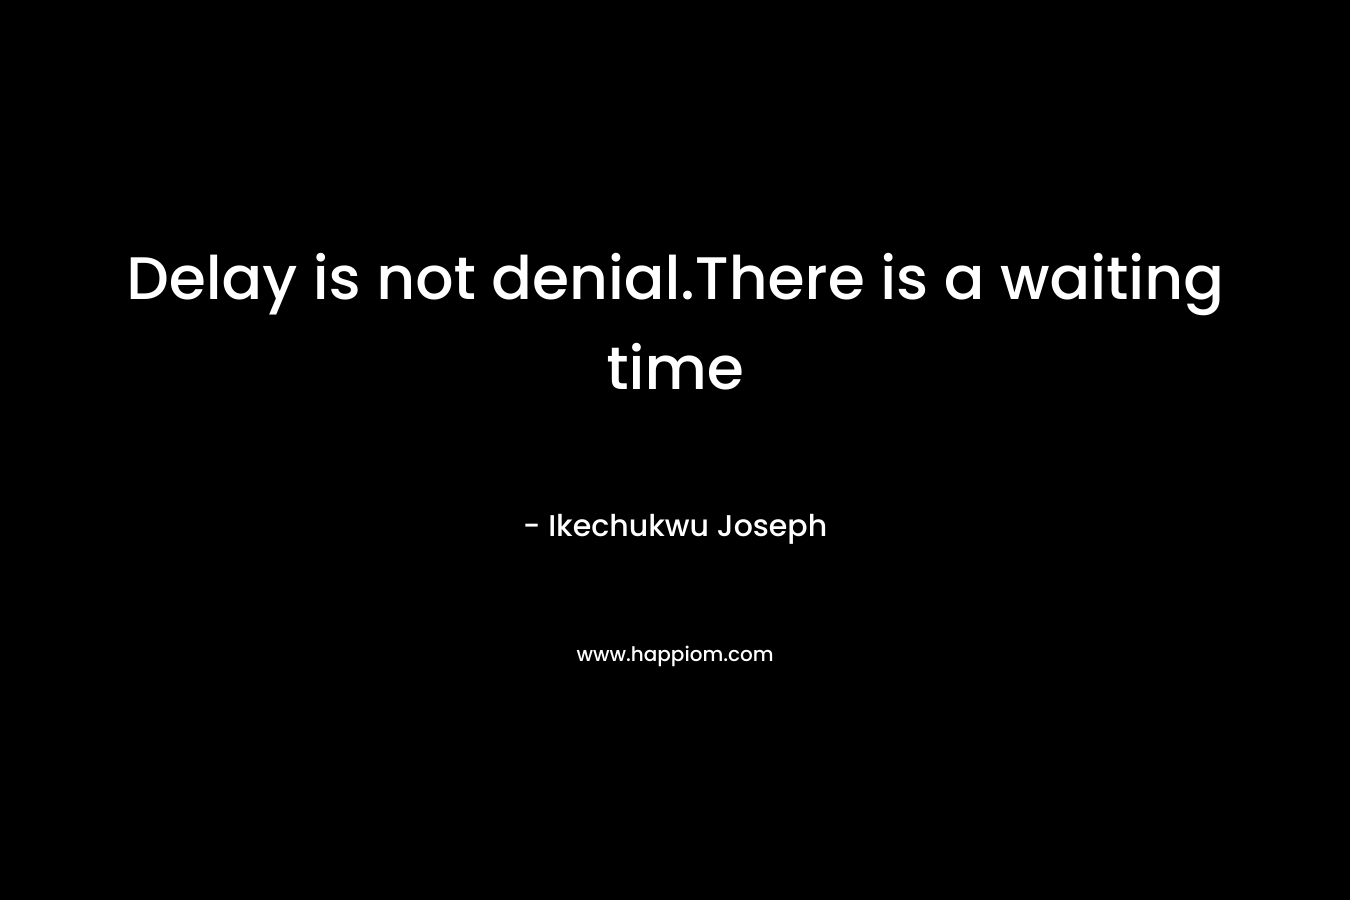 Delay is not denial.There is a waiting time